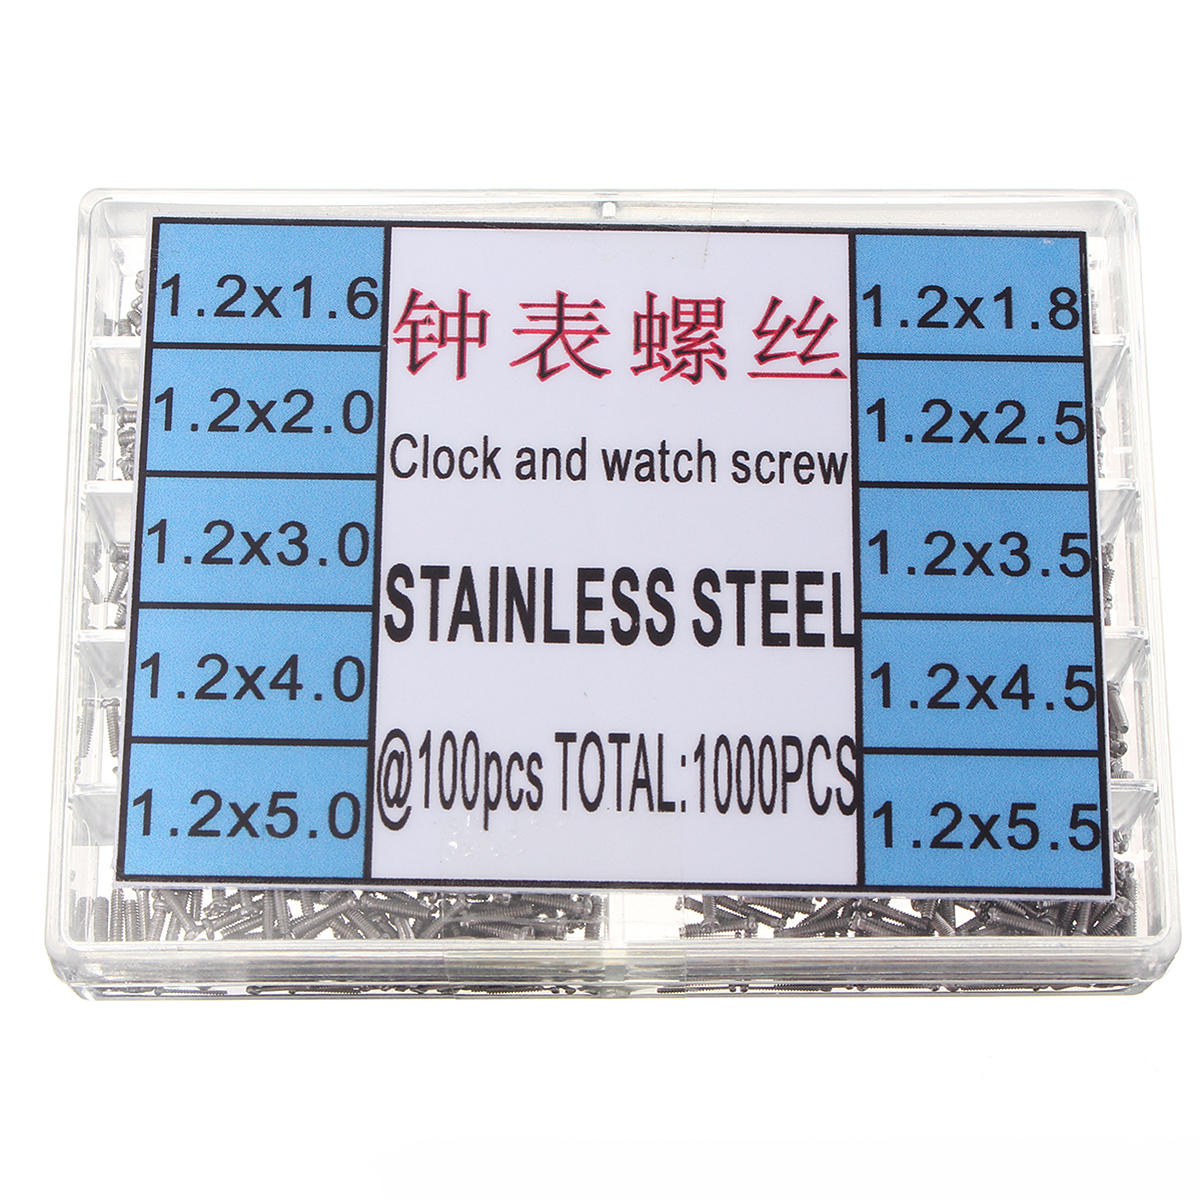 1000Pcs-Bottom-Cover-Screw-Steel-Repair-Kit-for-Clock-Watch-with-Case-10-Sizes-1166802